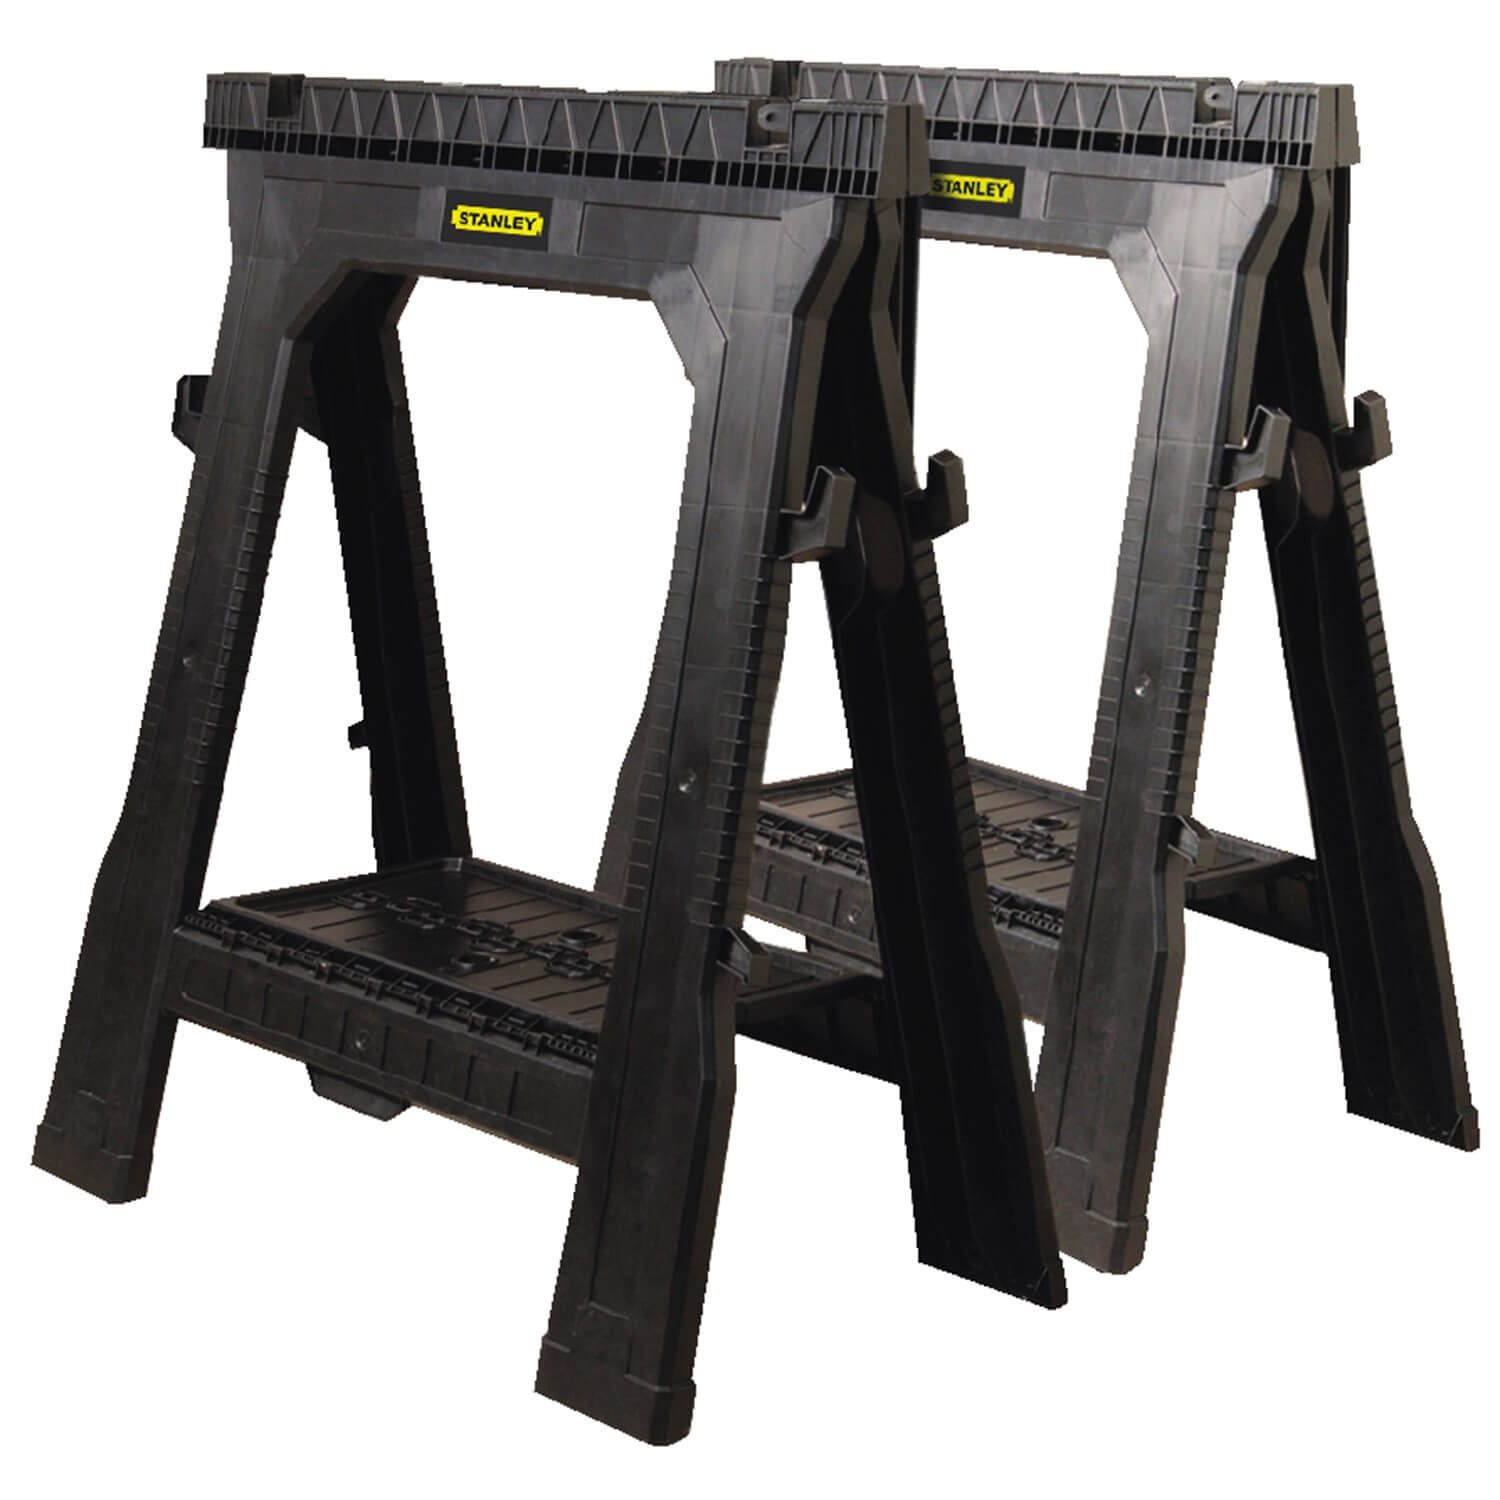 Stanley 060864R Folding Sawhorse (2-Pack) - wise-line-tools